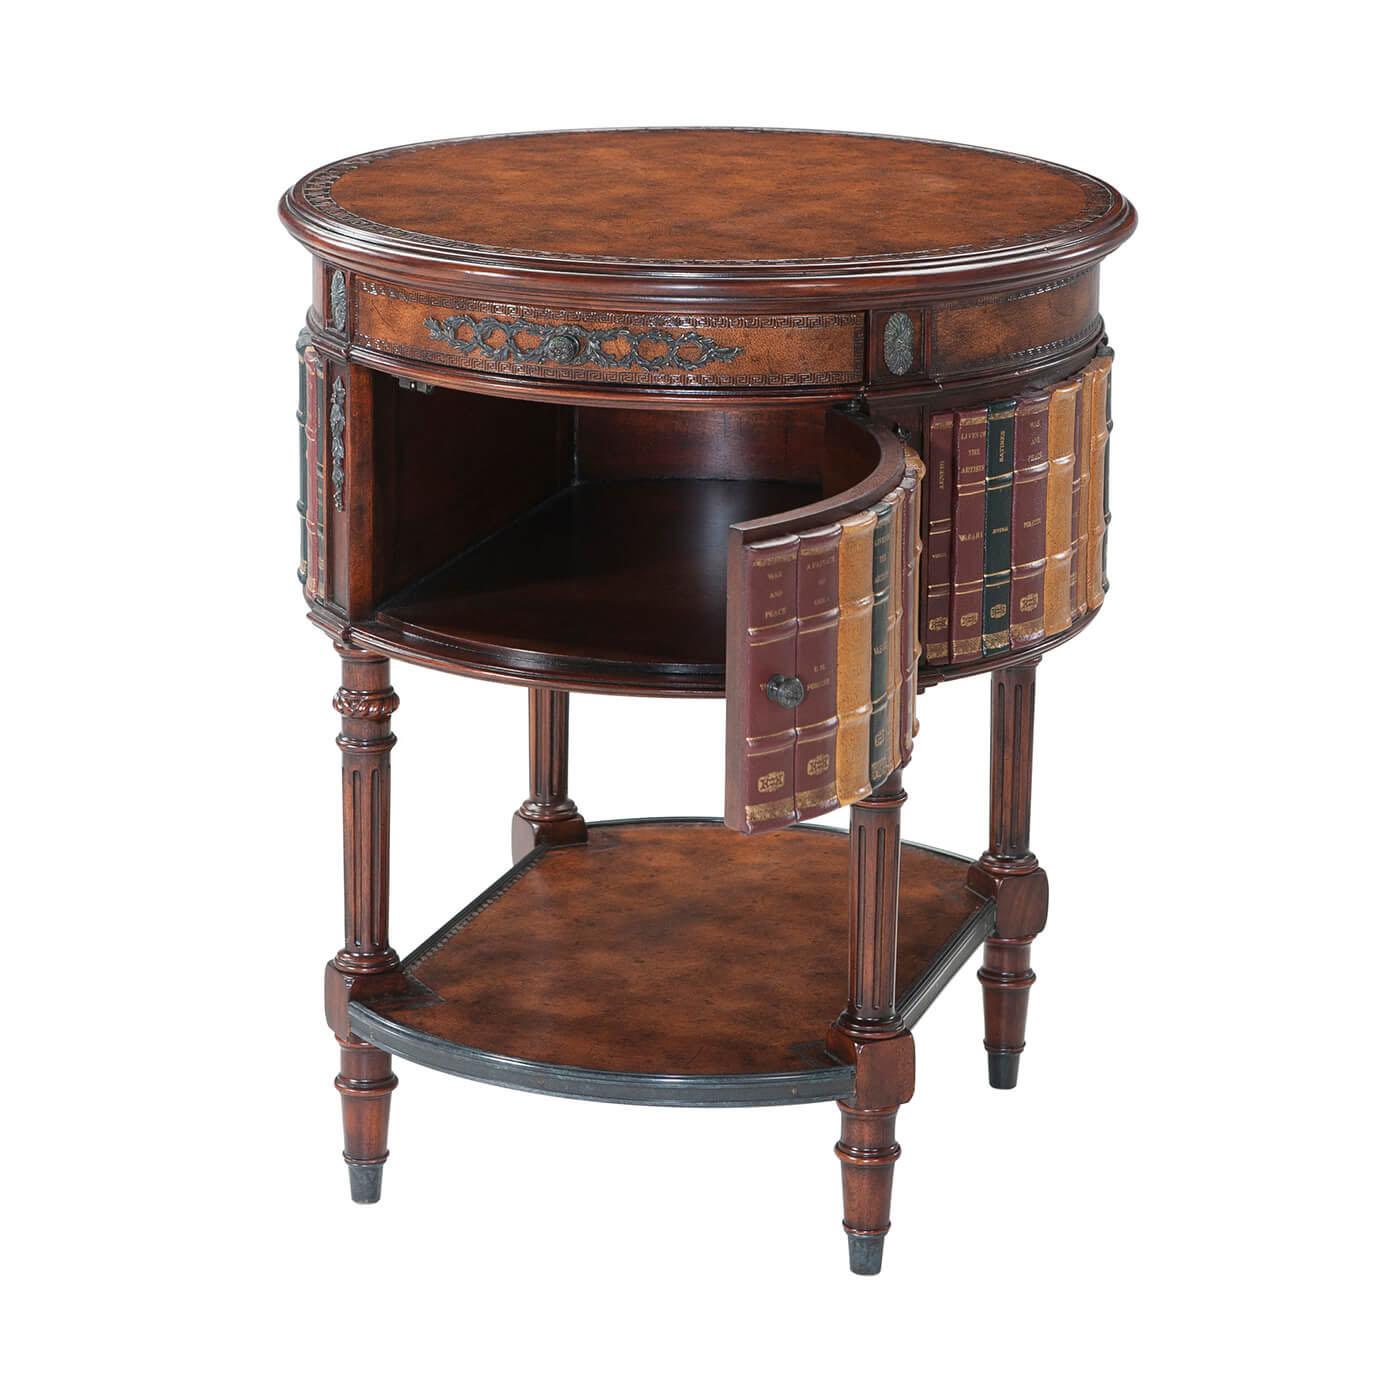 A Louis XVI style round lamp table with a faux book panel, verdigris brass mounts, aged brown leather top and under tier, drawer and cabinet, turned fluted legs. 

Dimensions: 24“ W x 24“ D x 28“ H.

 